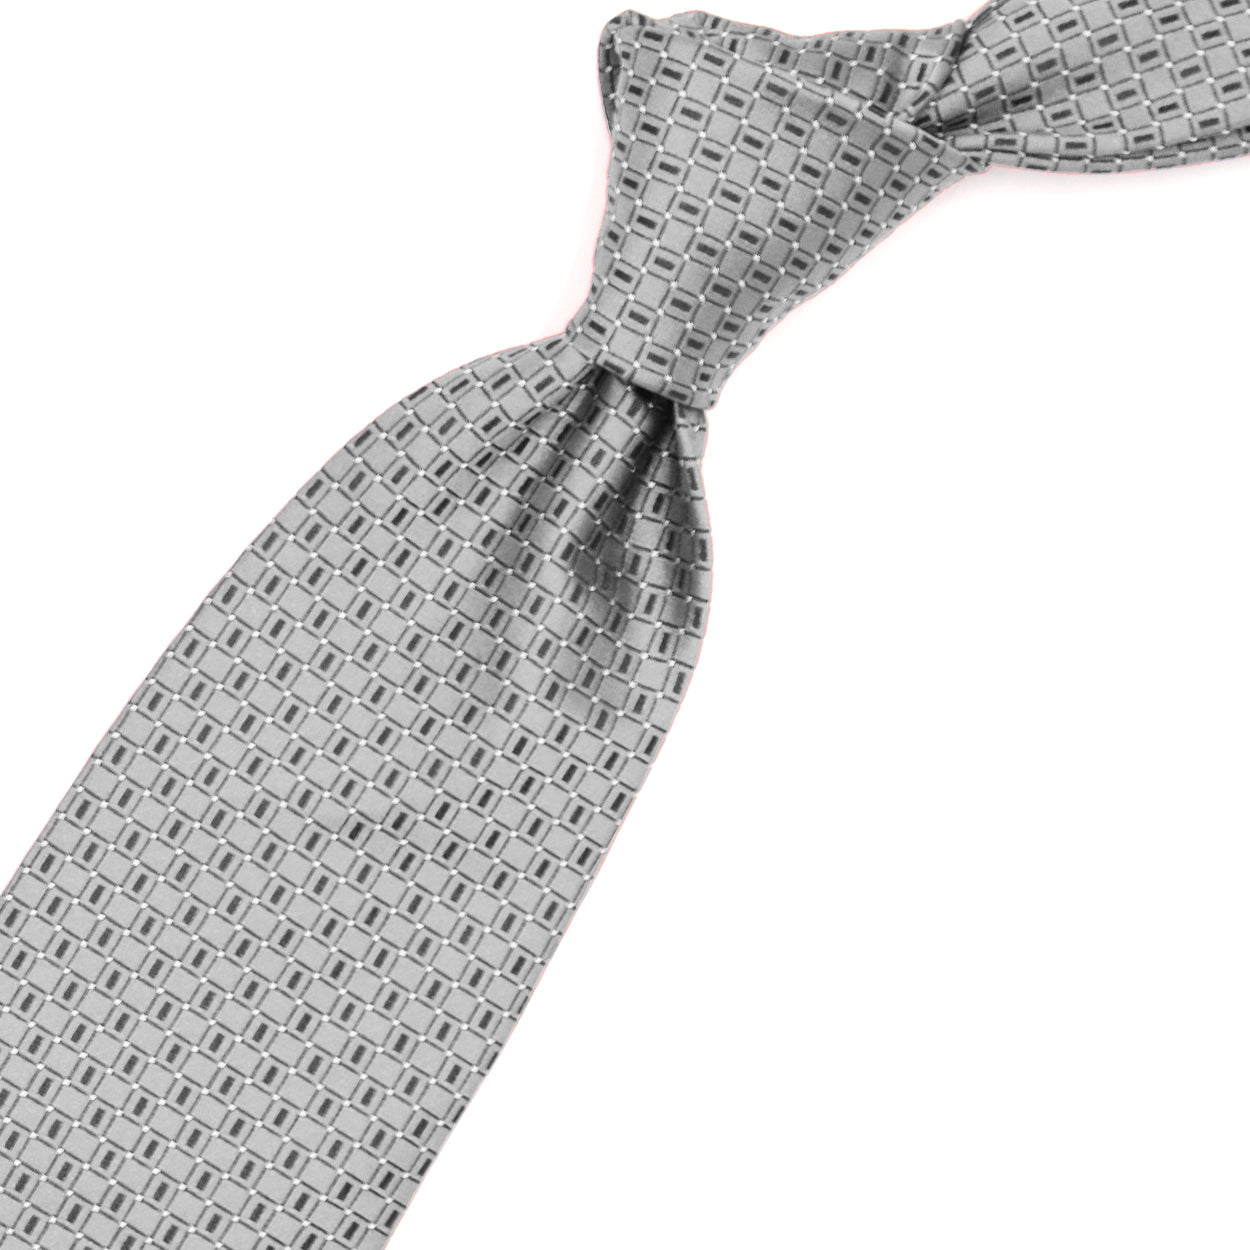 Grey tie with blue pattern and white dots